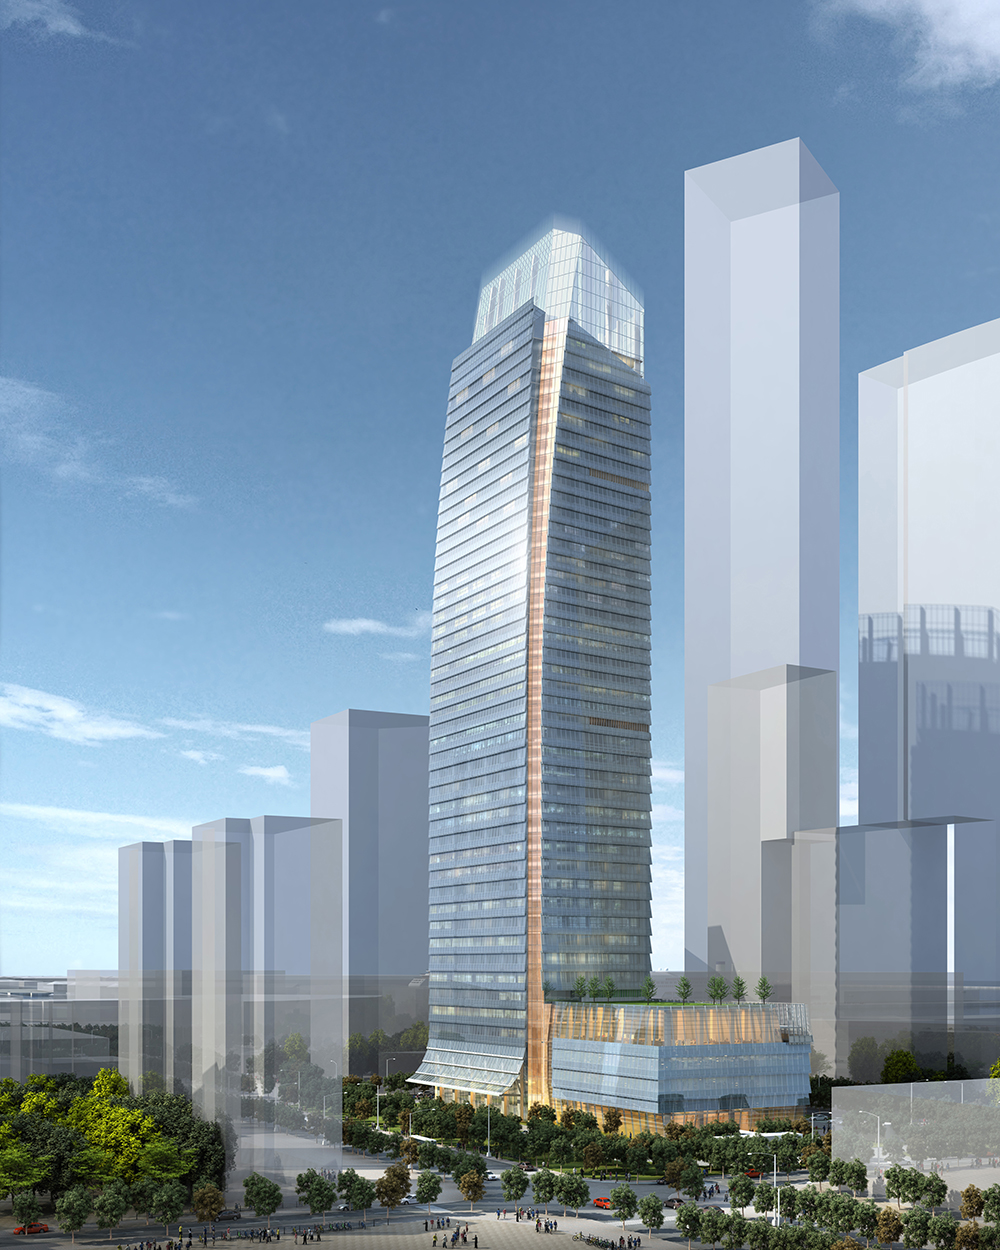 The Four Seasons Hotel Dalian will include approximately 250 guestrooms